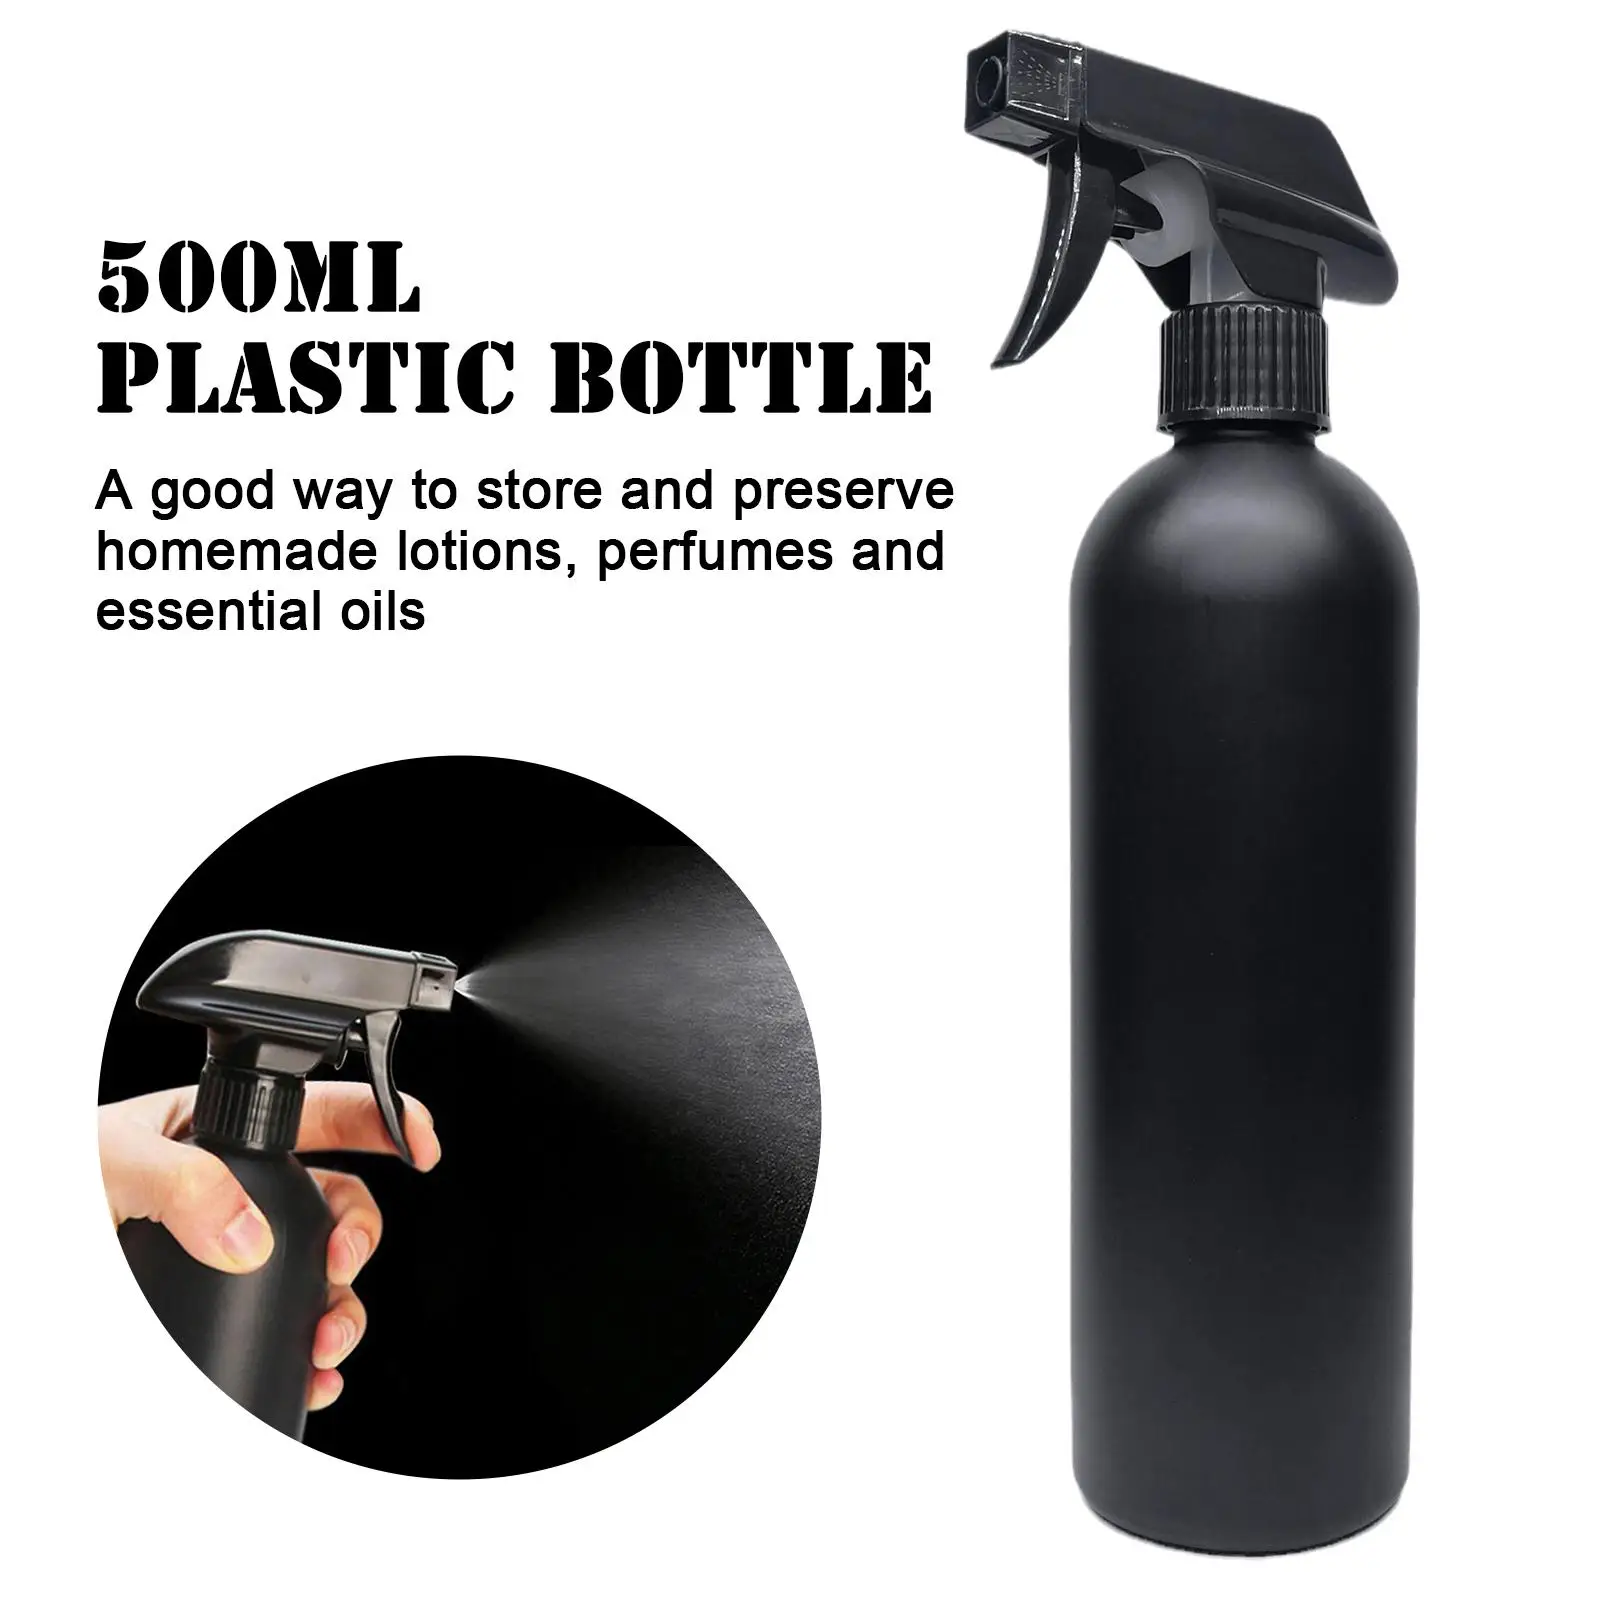 500ML Plastic Refillable Bottle Spray Bottles Empty Skin Care Refillable Perfume Dispensing Aromatherapy Tool Flip-top Cont J3A4 2022 hollow petal design wifi wood grain aroma diffuser 500ml ultrasonic cool mist aromatherapy humidifiers diffusers essentials